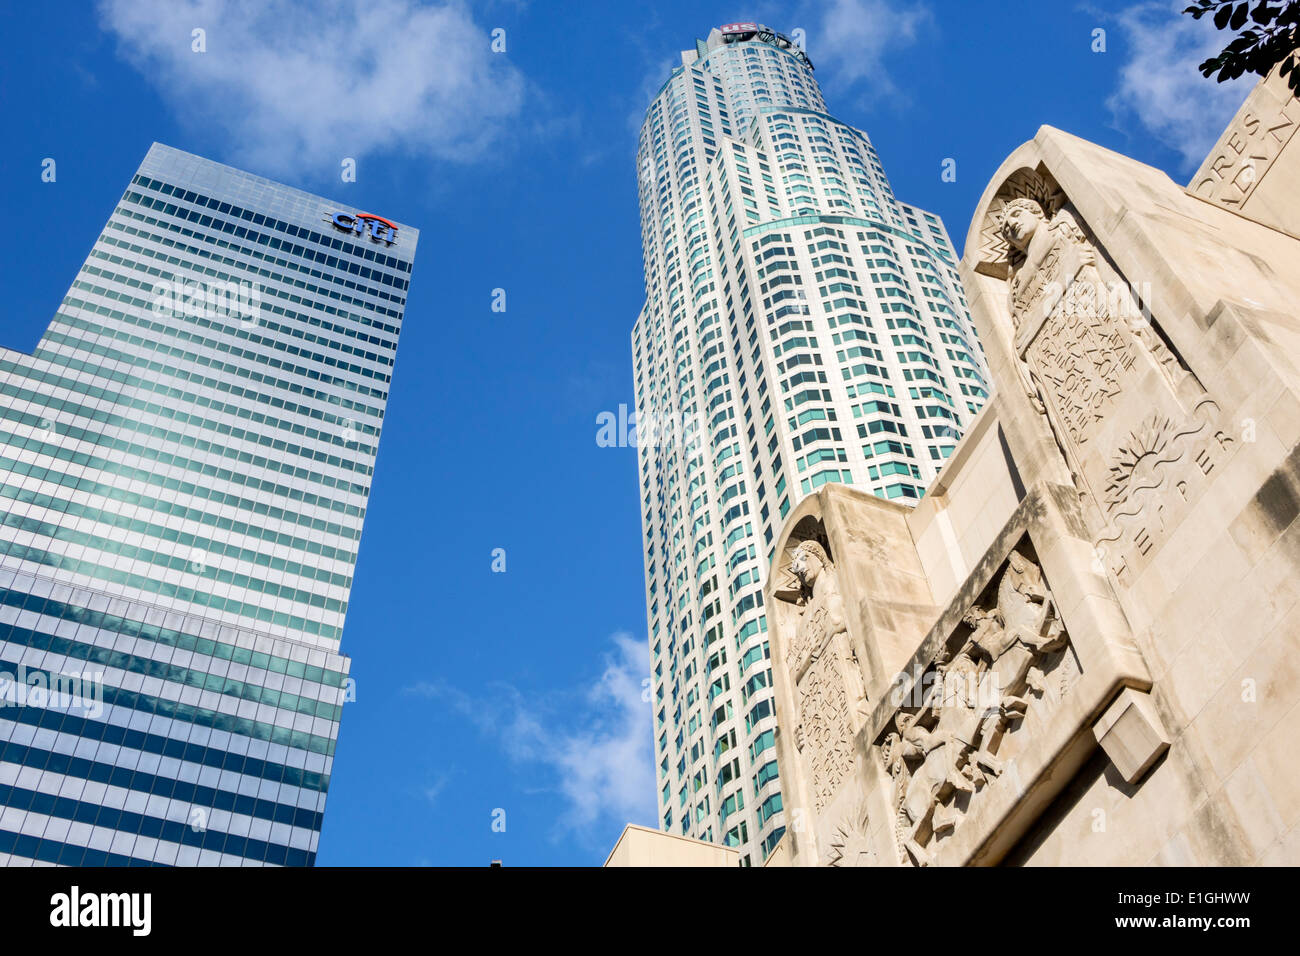 Los Angeles California,Financial District city skyline,skyscraper high-rise US Bank Tower Library Tower,postmodern architecture Pei Cobb tallest Citig Stock Photo